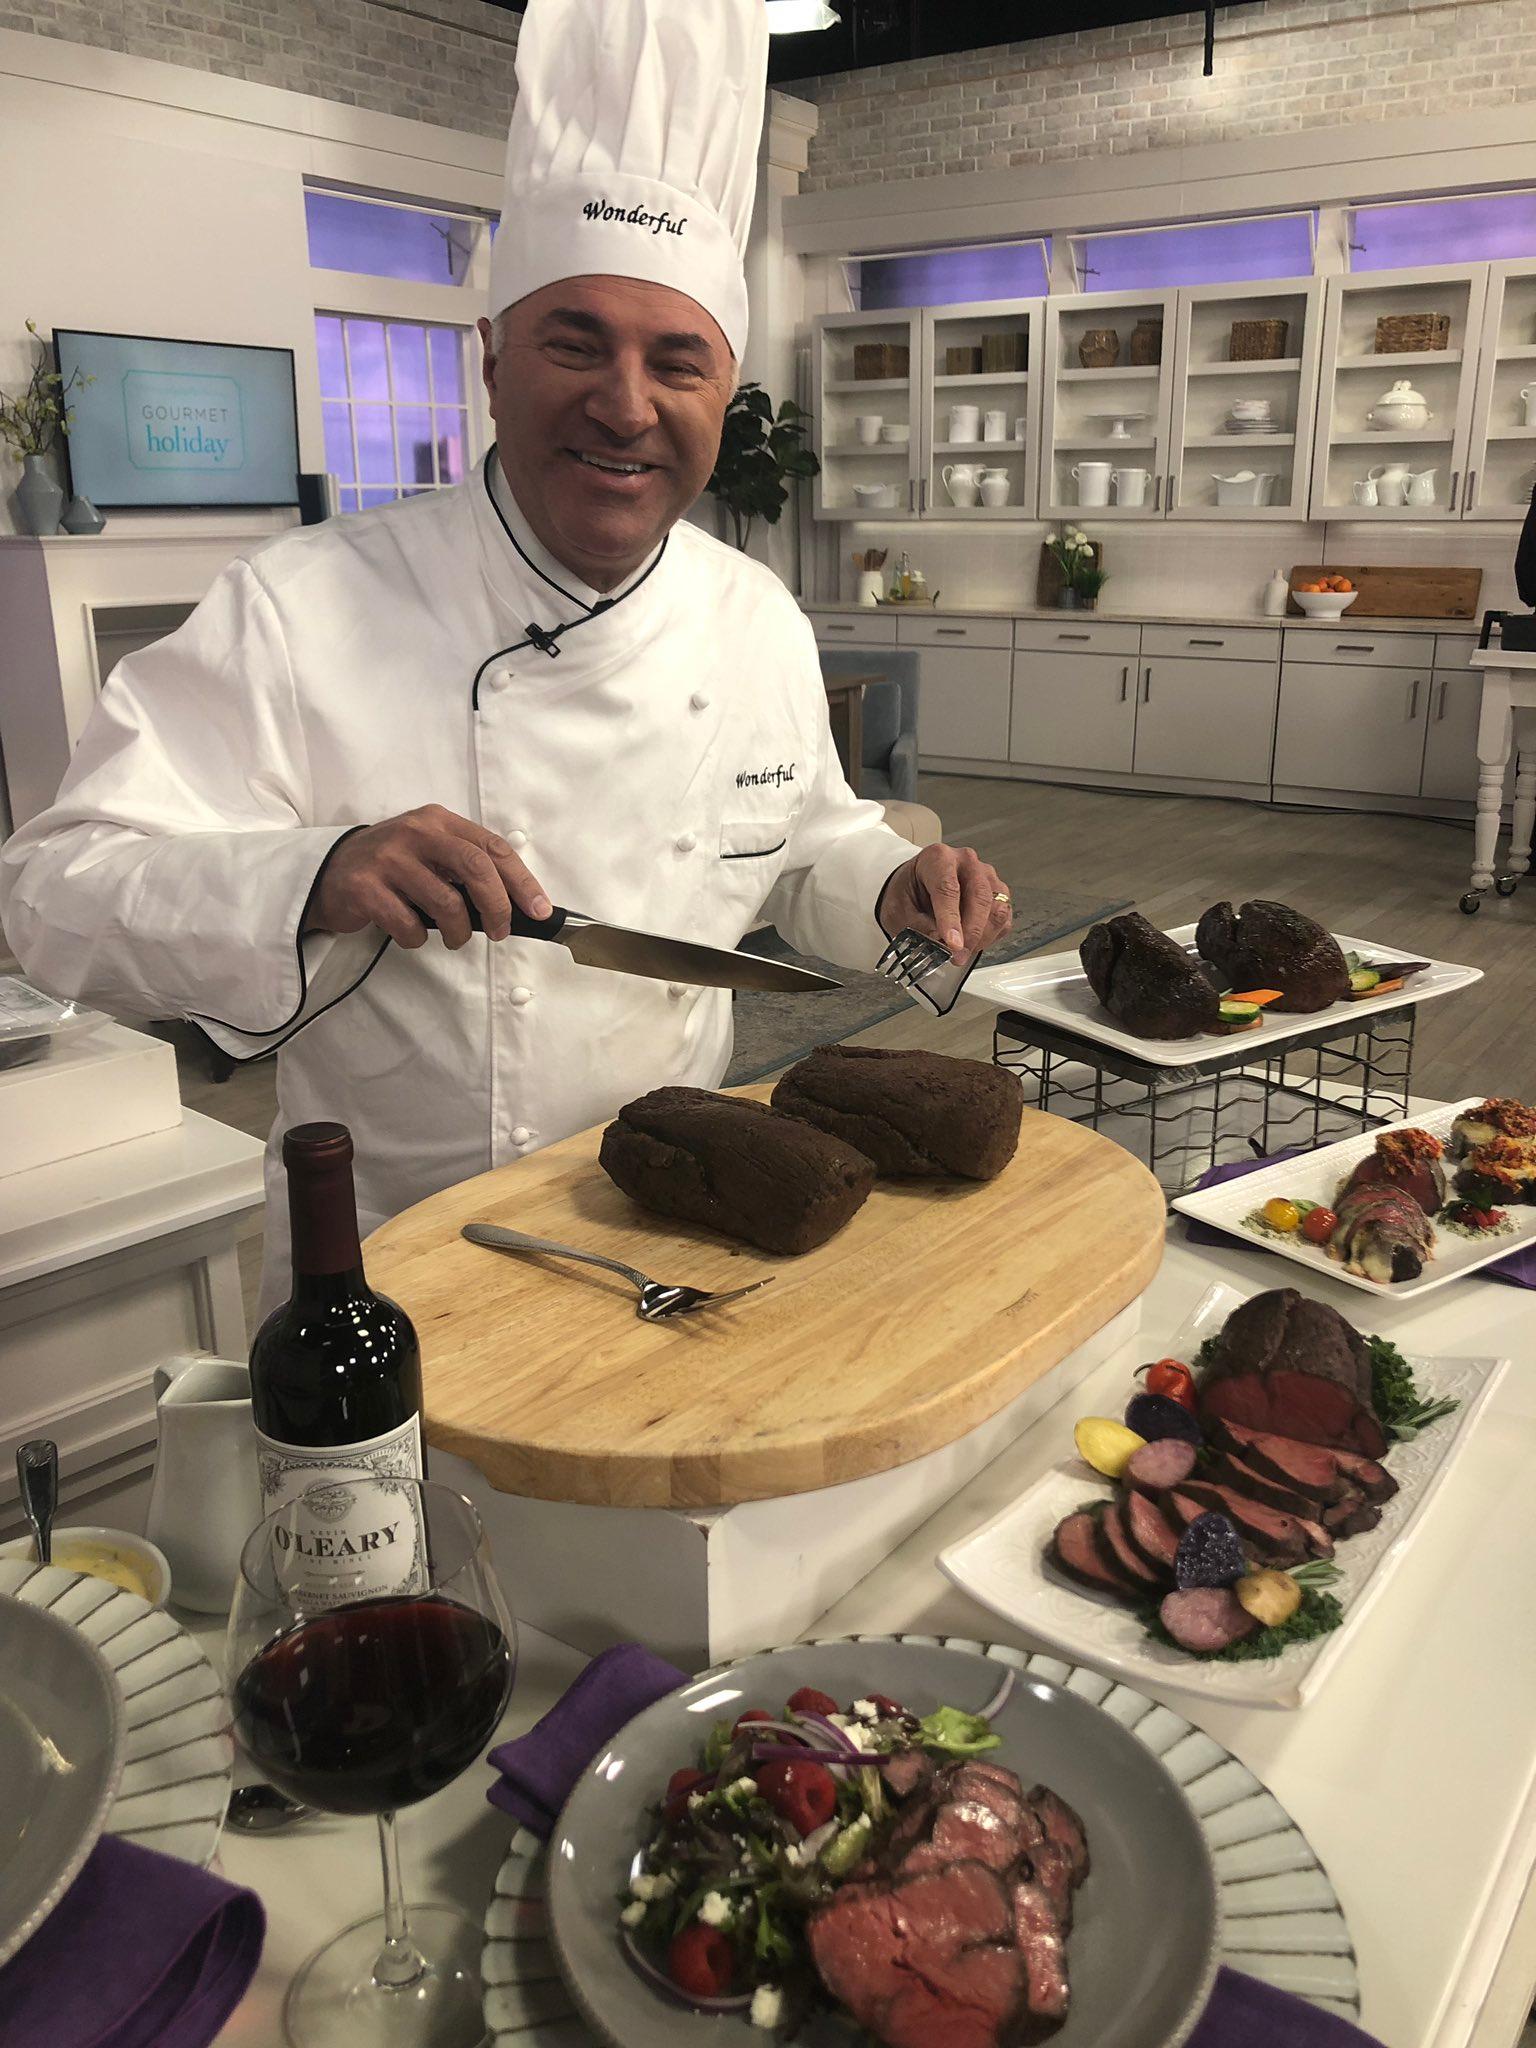 Kevin O'Leary cutting beef wellington while wearing a chef's hat and jacket.